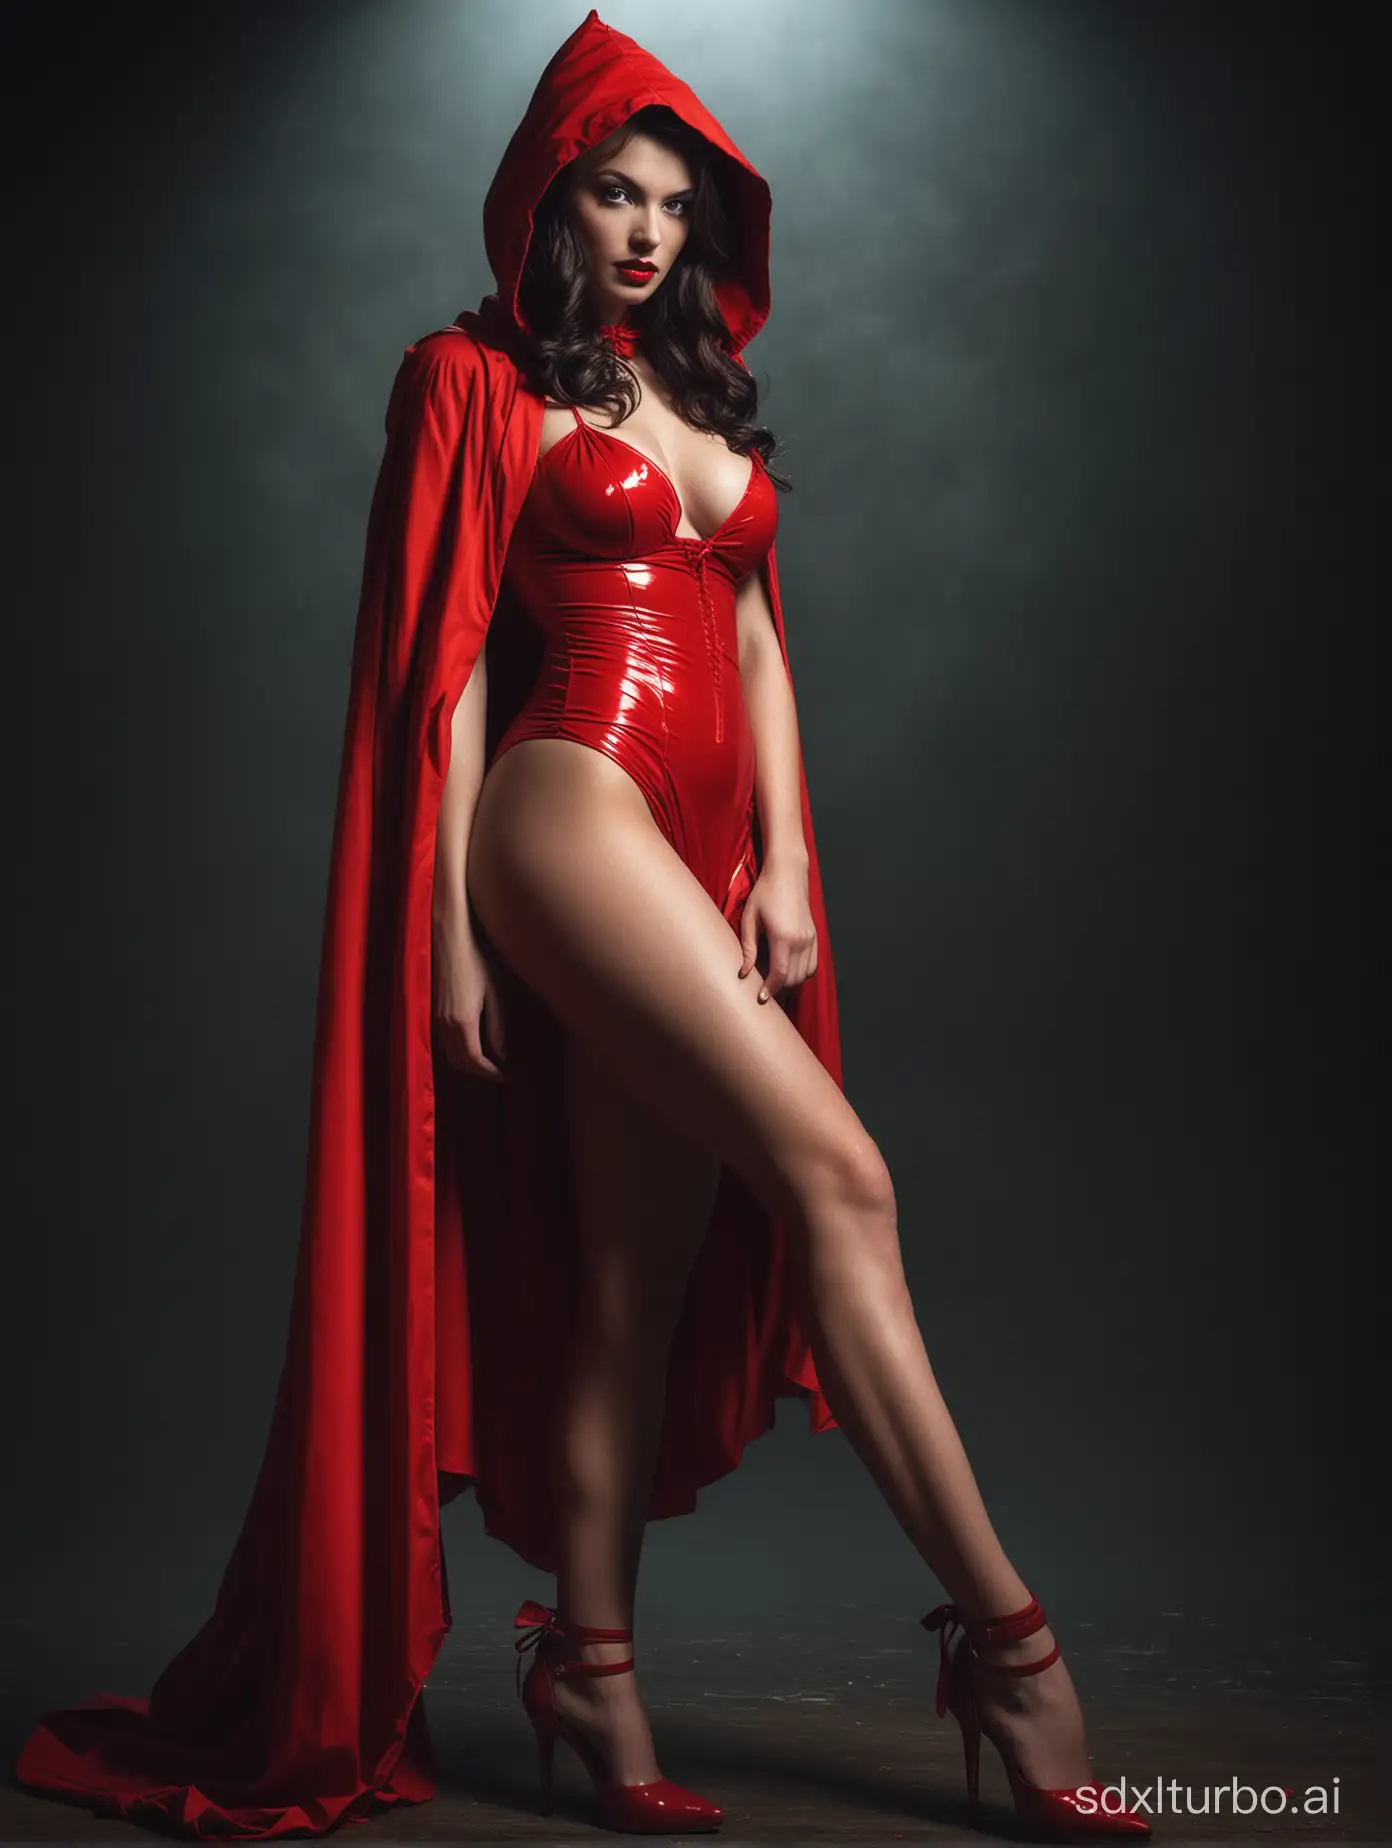 Raw Photo A breathtaking pulp art-inspired photograph that pays homage to Frank Frazetta's style. The subject is a captivating, real-life Red Riding Hood with a modern twist, showcasing voluptuous and long, legs. Wearing a short, revealing, provocative red hooded dress. The background is dark and moody, with dramatic lighting that accentuates her features. The overall vibe of the image is a mix of fantasy, pinup, and realism, making it perfect for a high-quality poster., poster, photo